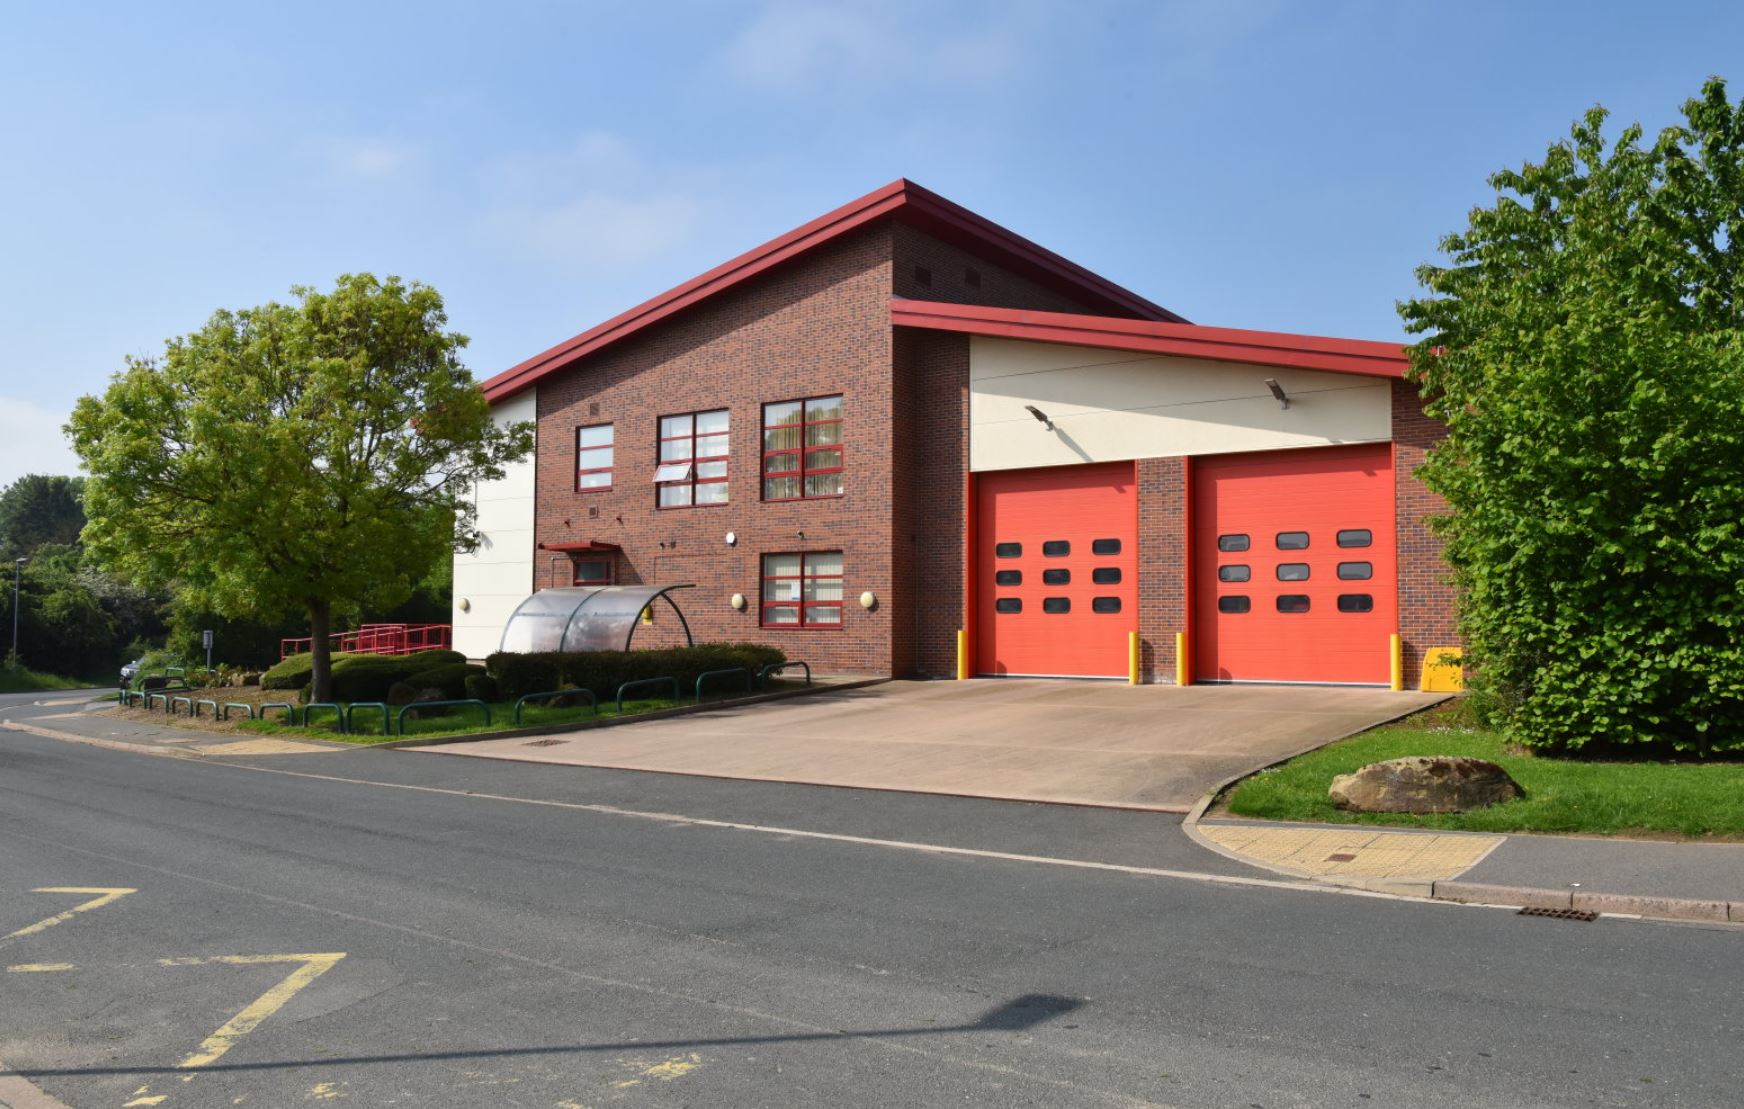 Pontefract fire station. 